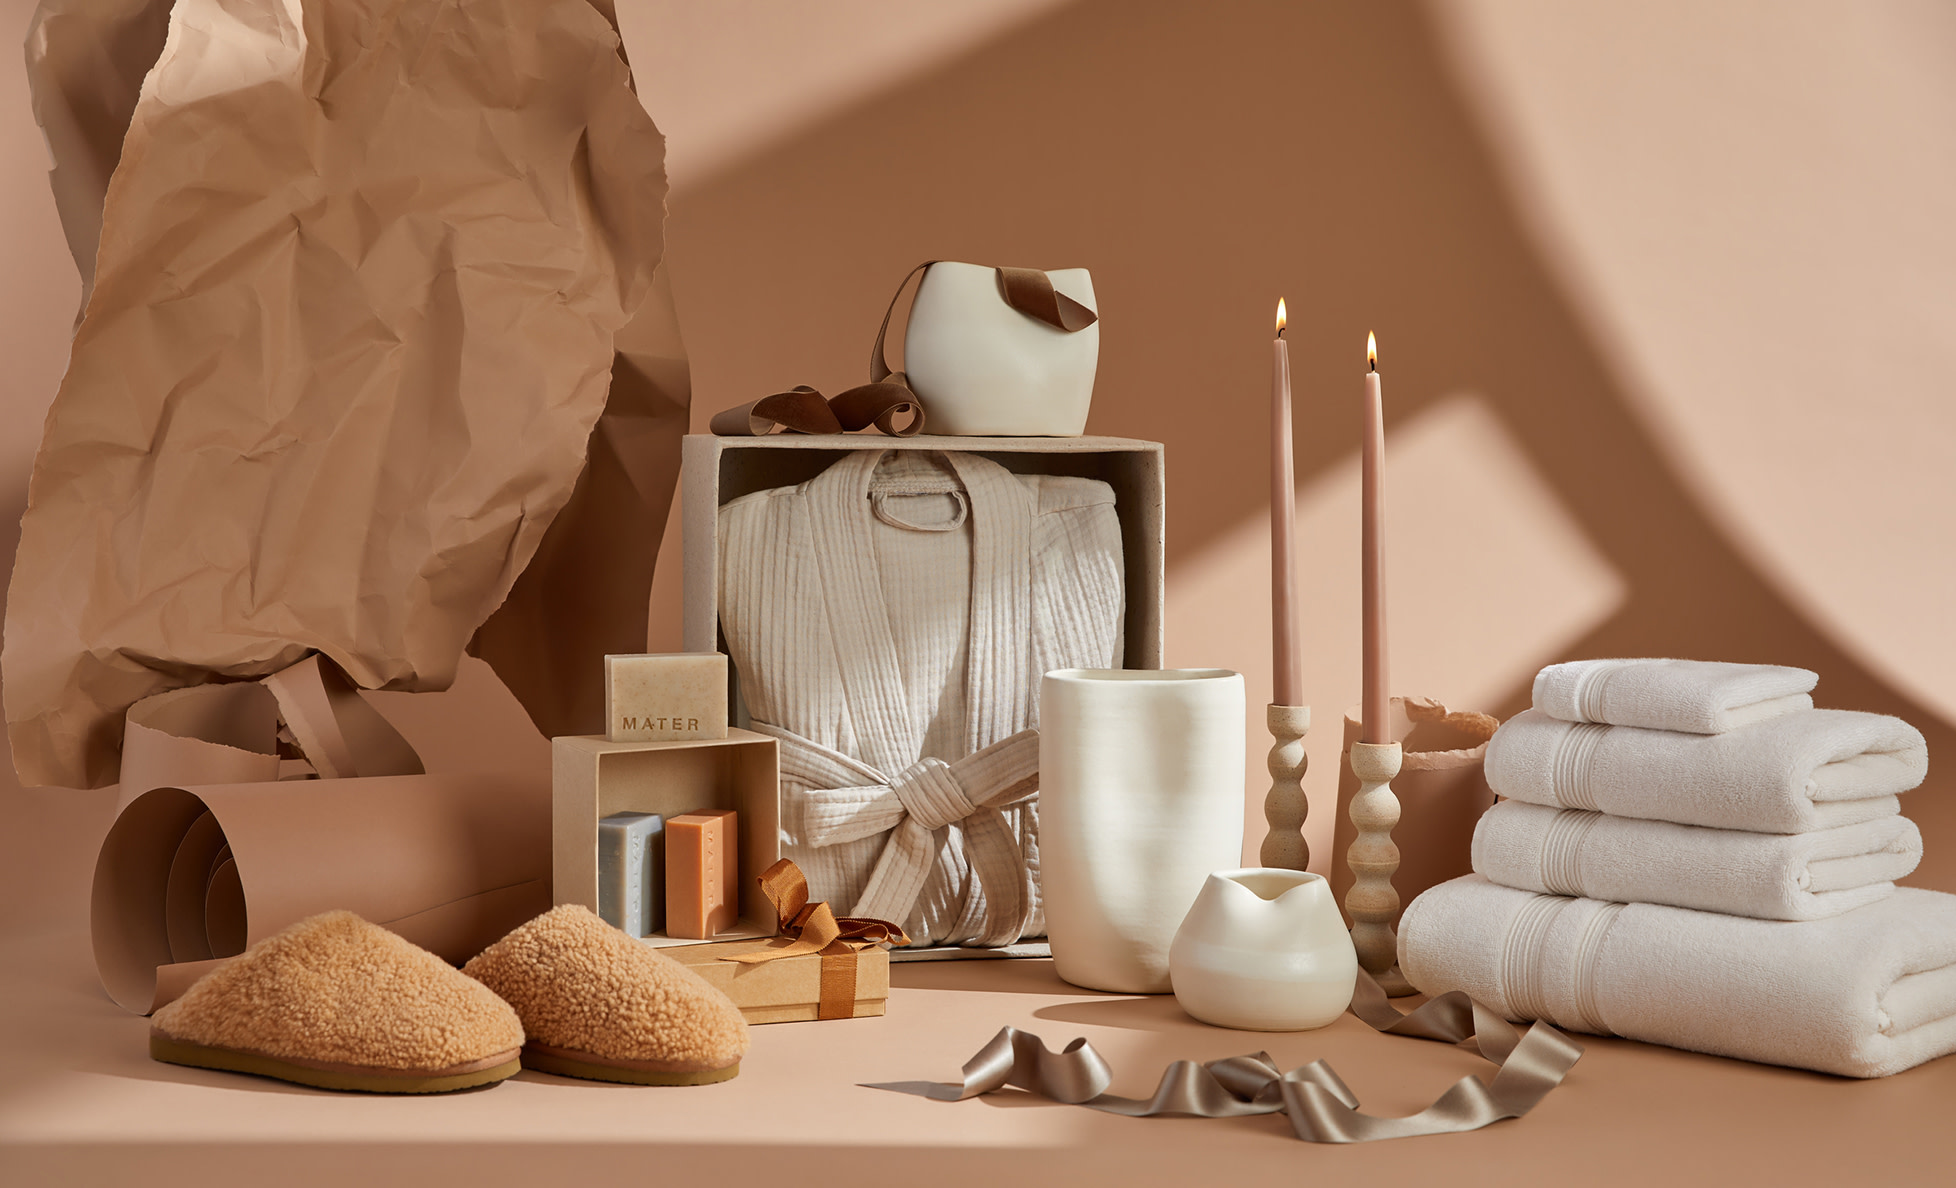 Holiday selection of gift items on a tan backdrop